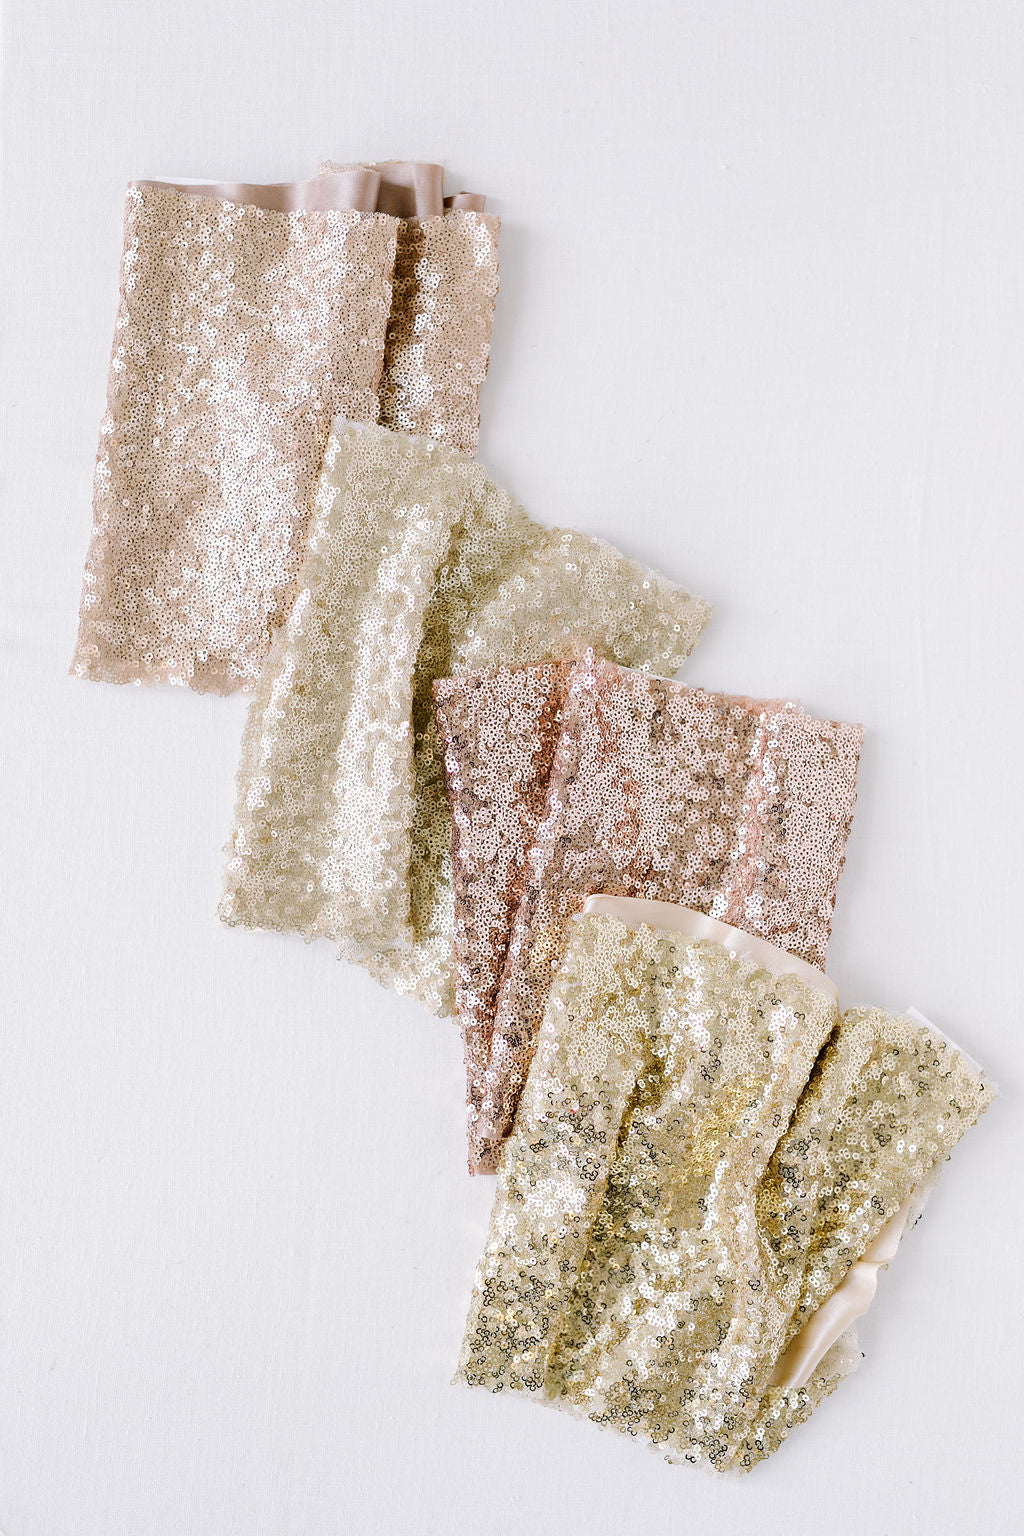 54 W * Standard Gold on Gold Glitter Sparkle Stretch Tulle Fabric * Price  per Yard * 2-Way Stretch